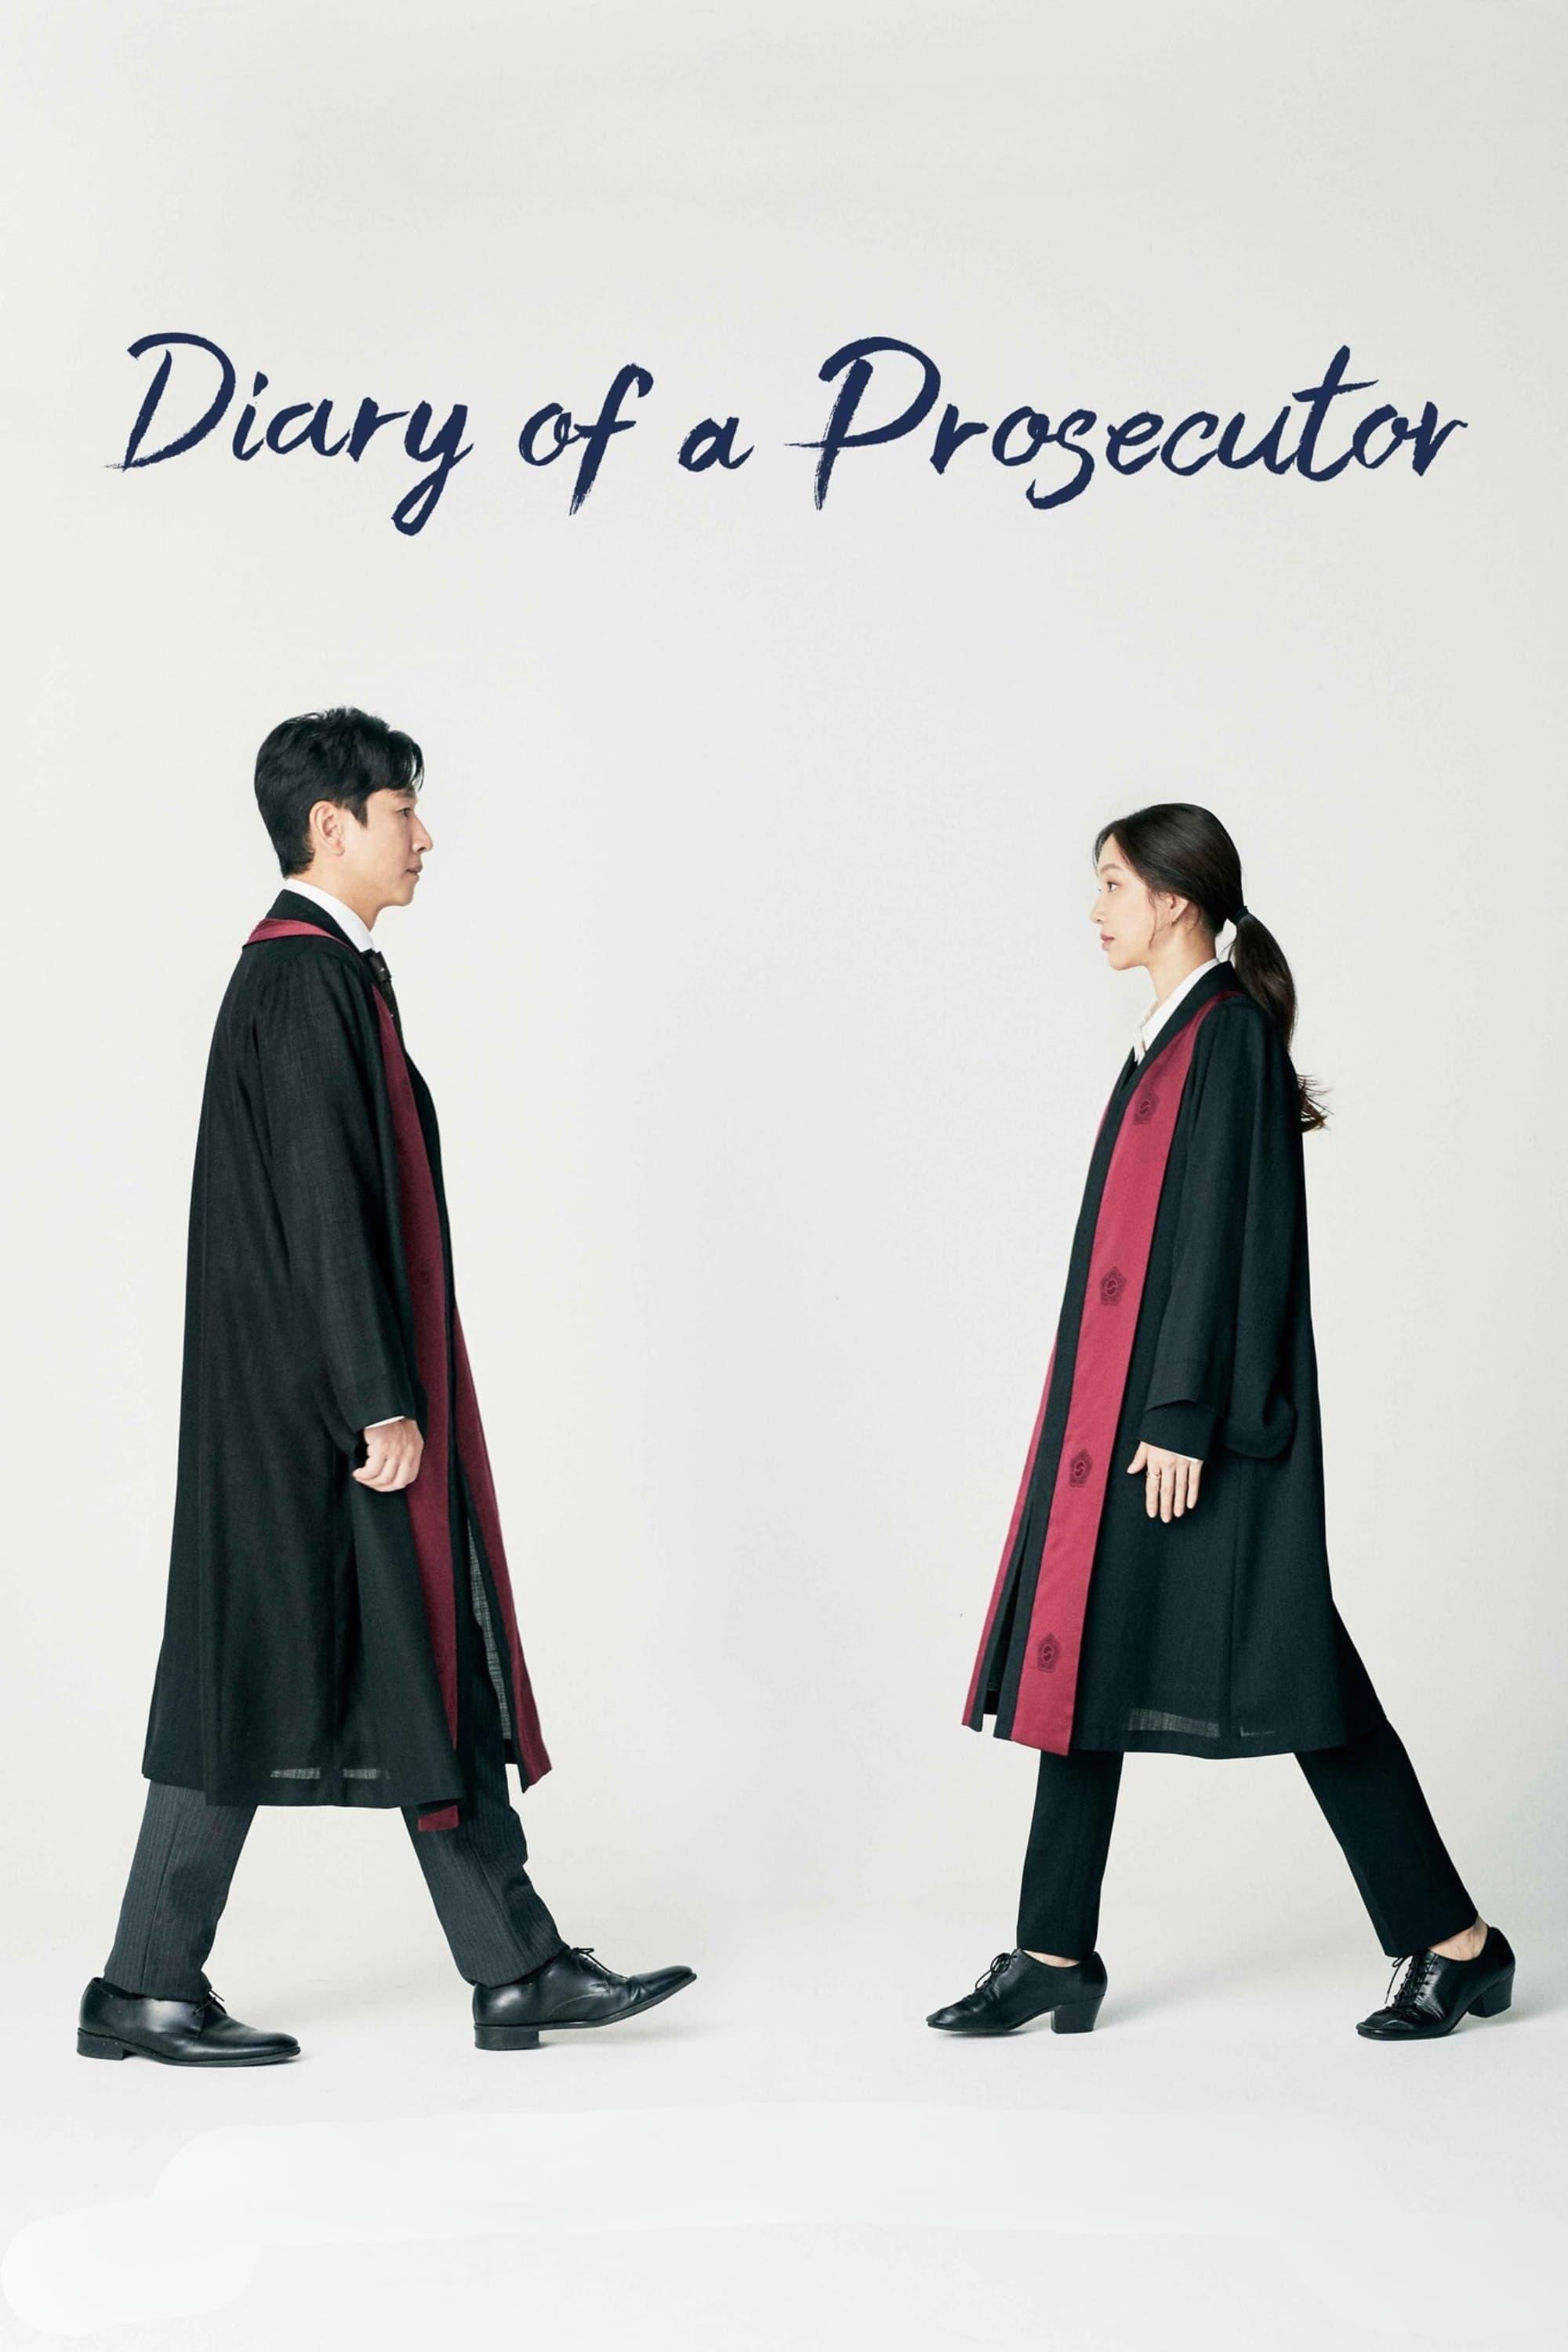 Diary of a Prosecutor poster